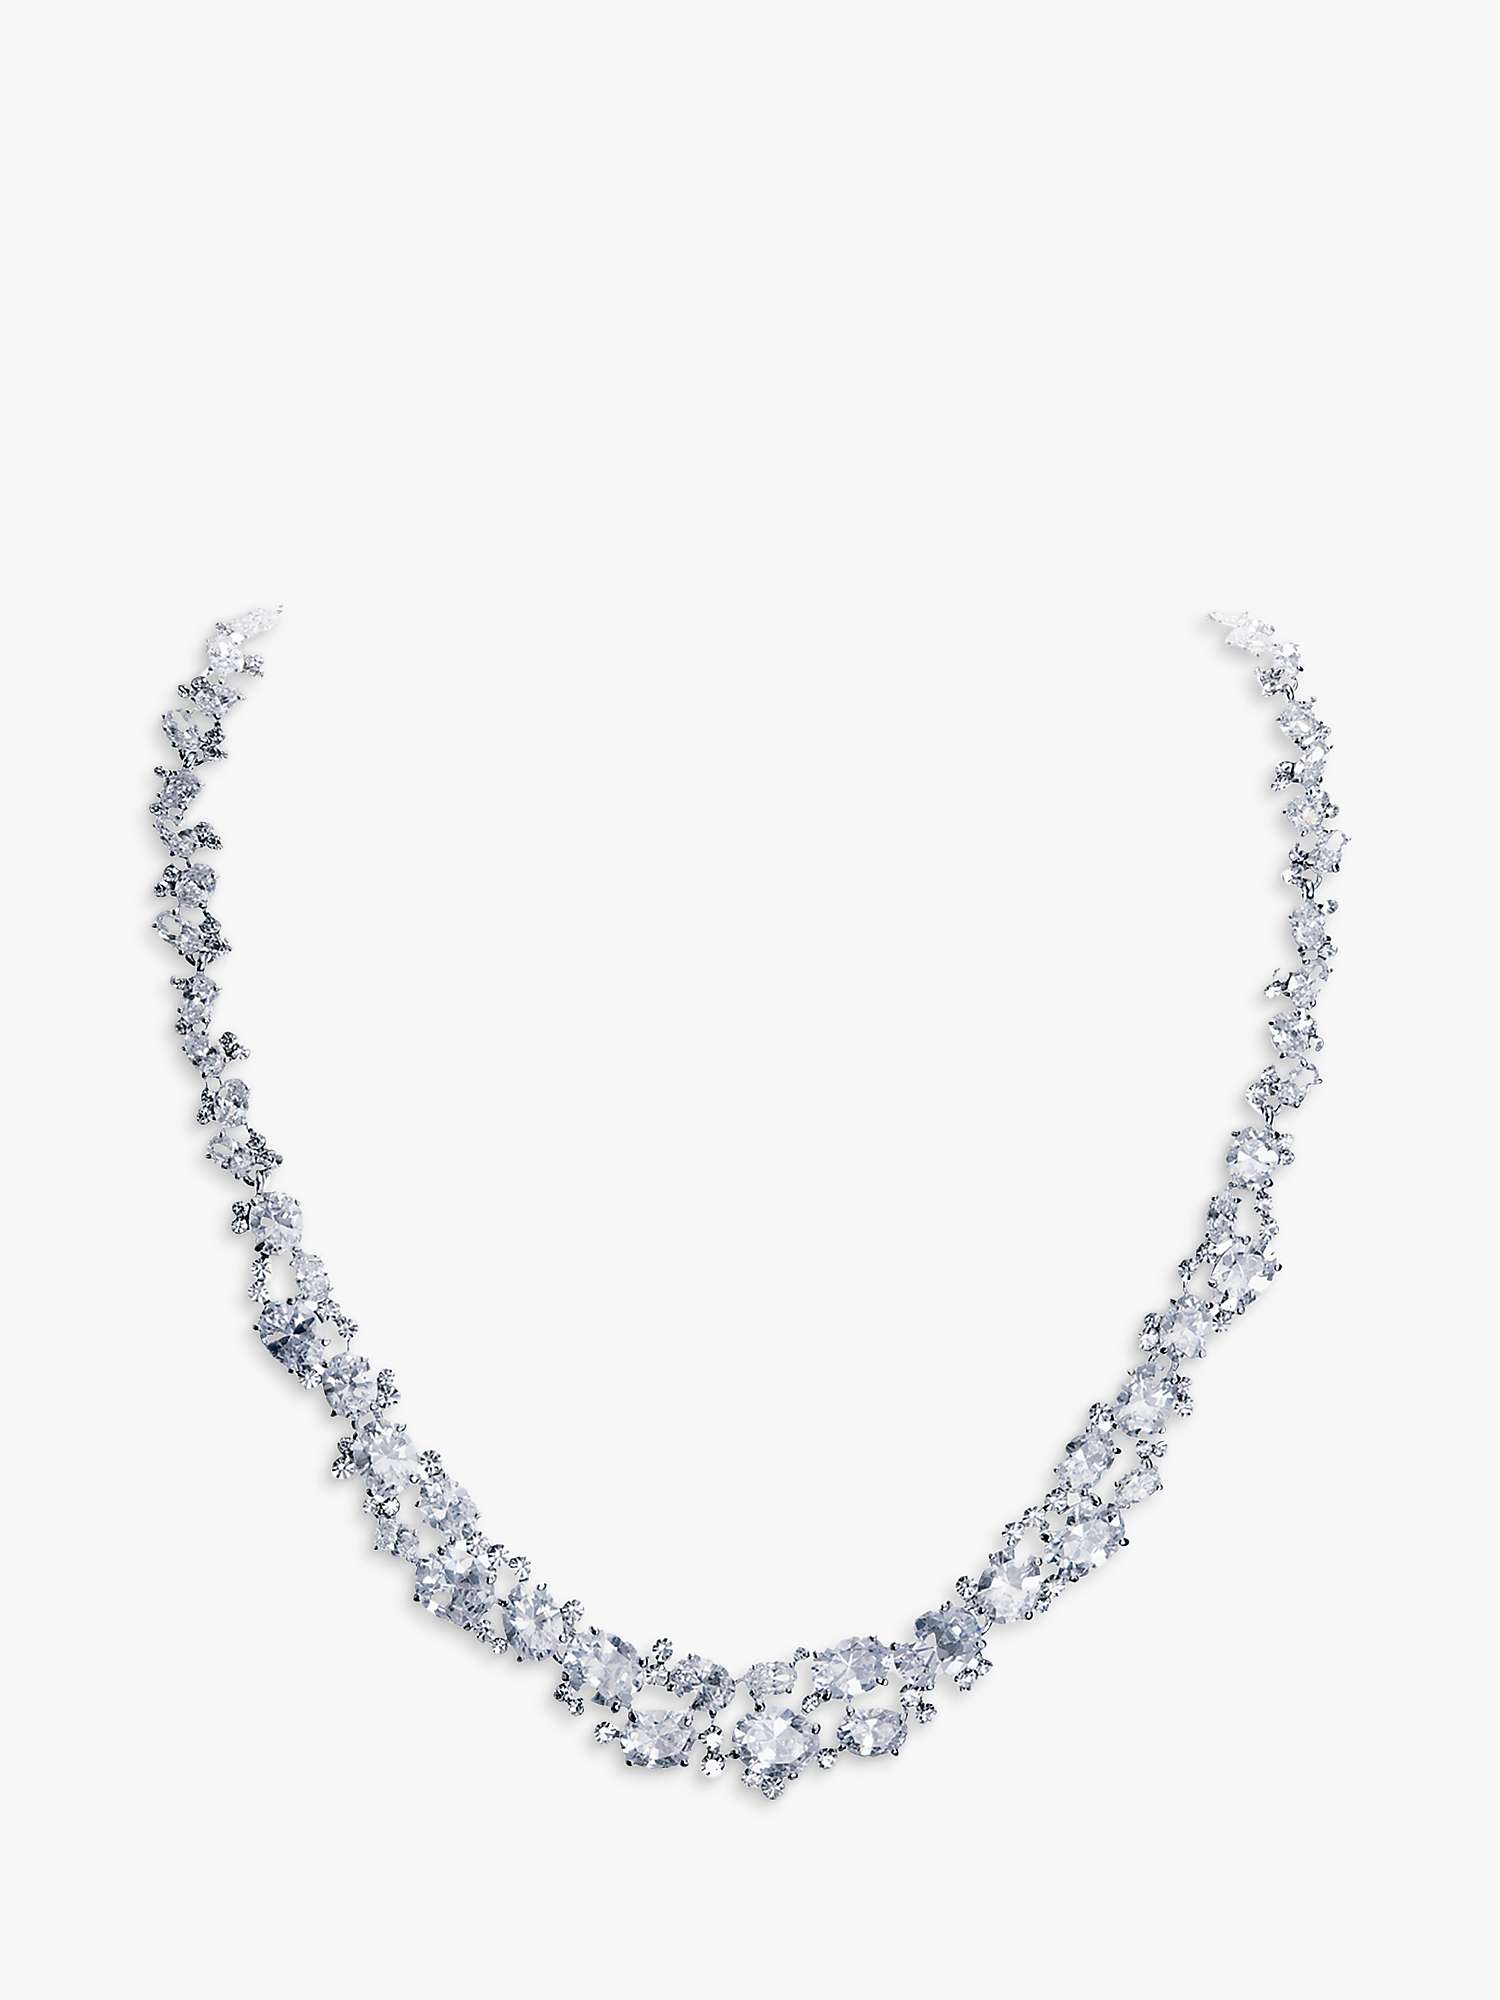 Buy Ivory & Co. Crystal Collar Necklace, Silver Online at johnlewis.com